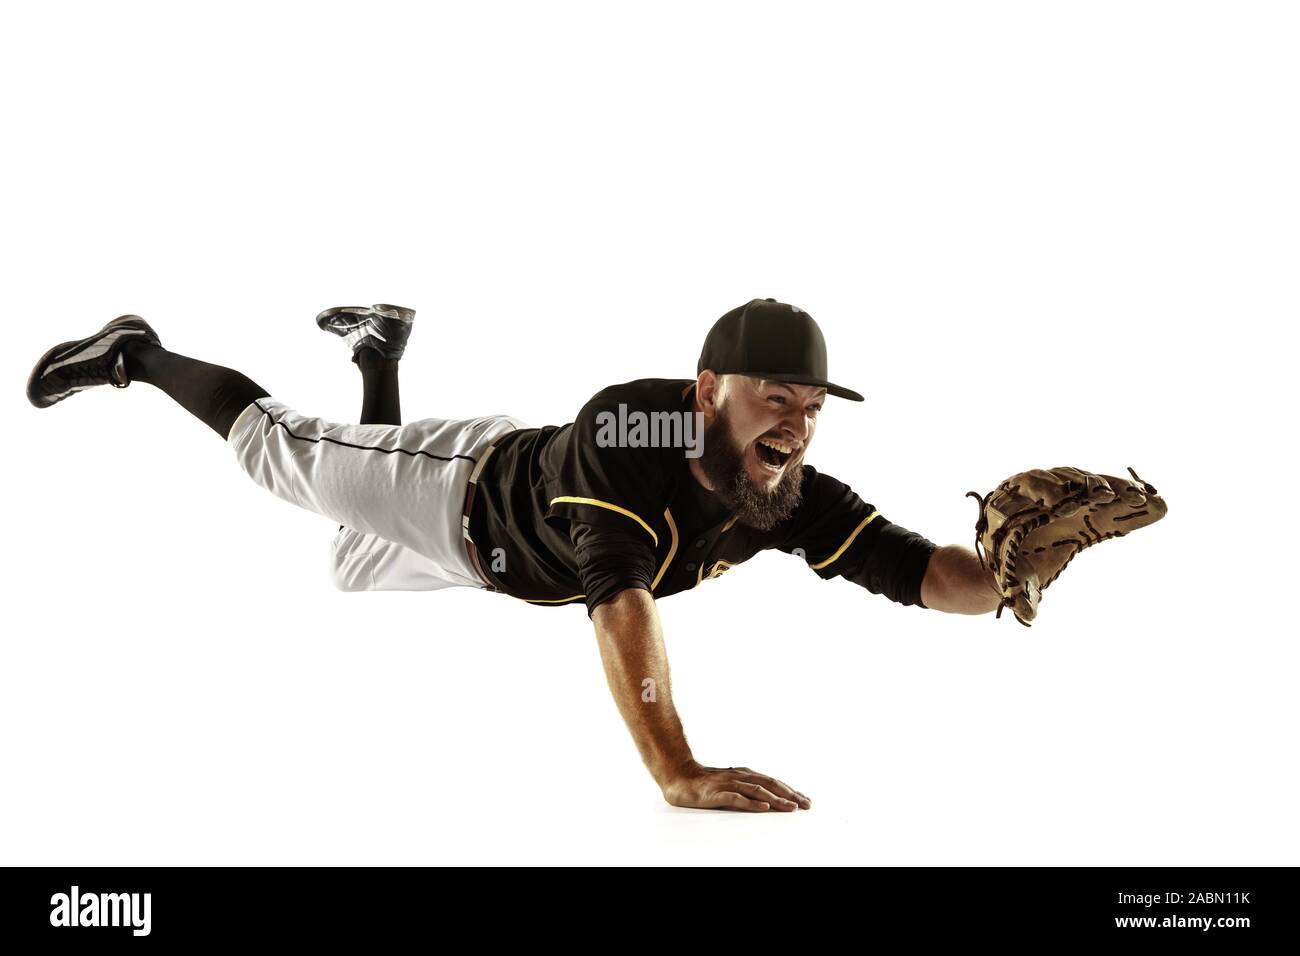 In flight. Baseball player, pitcher in black uniform practicing and training isolated on white background. Young professional sportsman in action and motion. Healthy lifestyle, sport, movement concept. Stock Photo